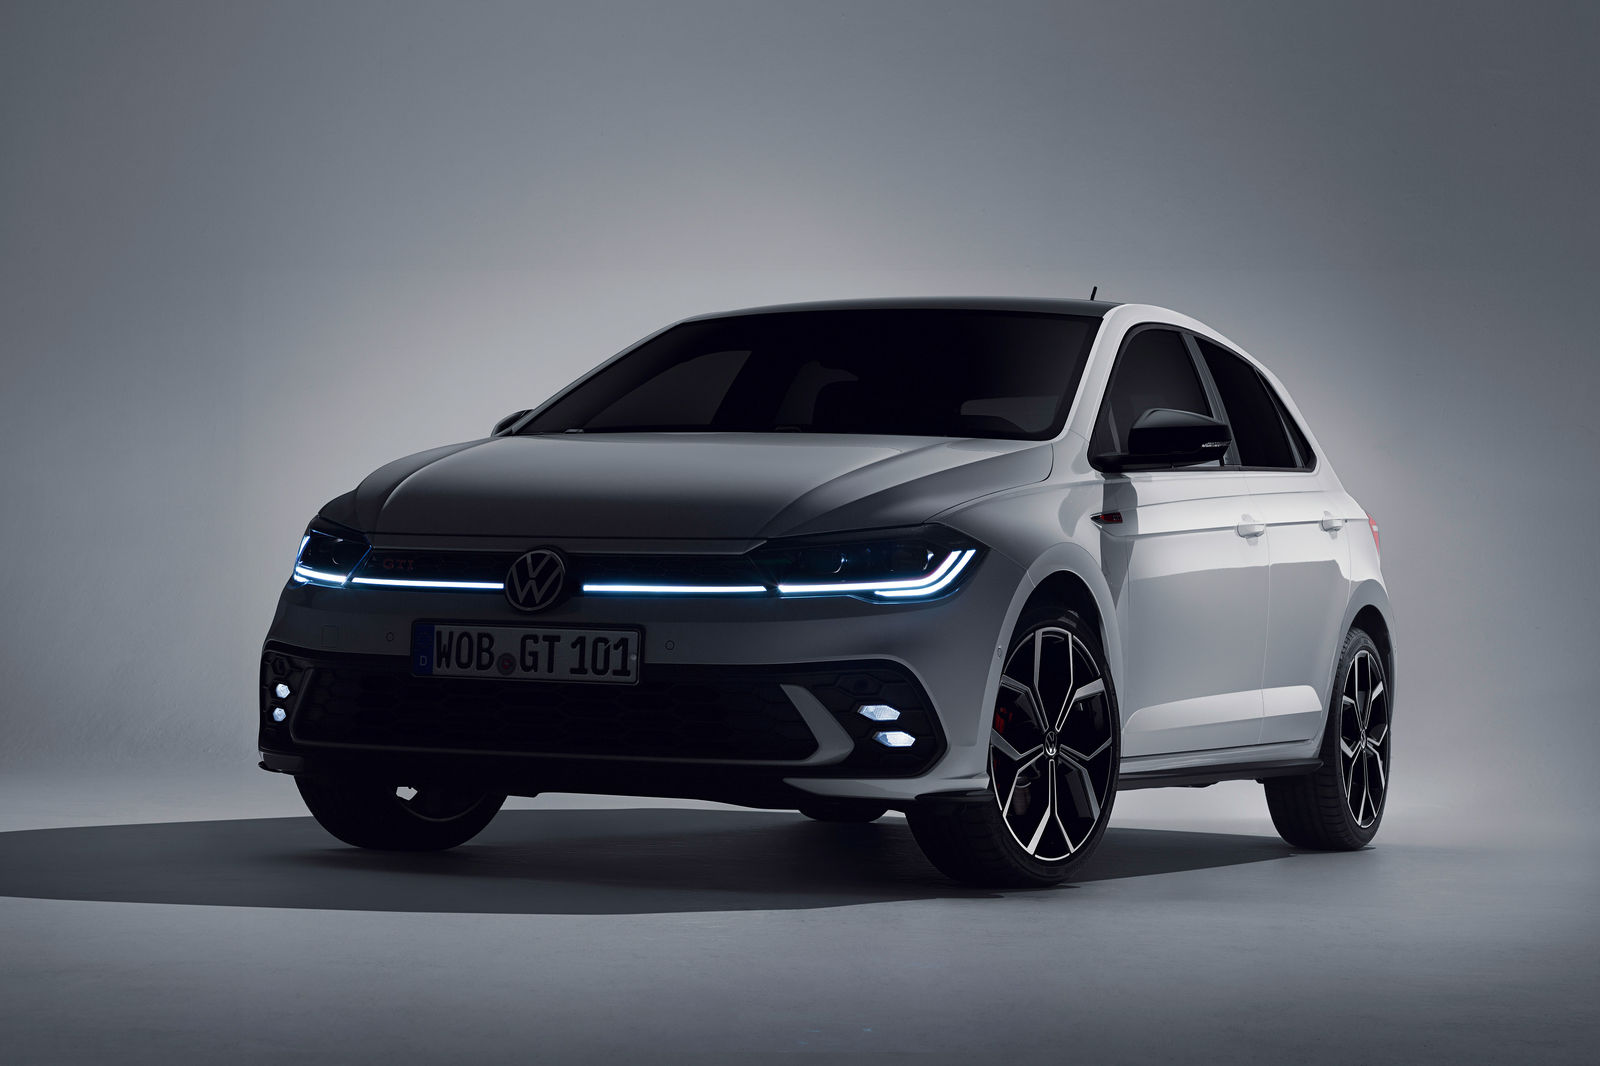 The new Volkswagen Polo GTI